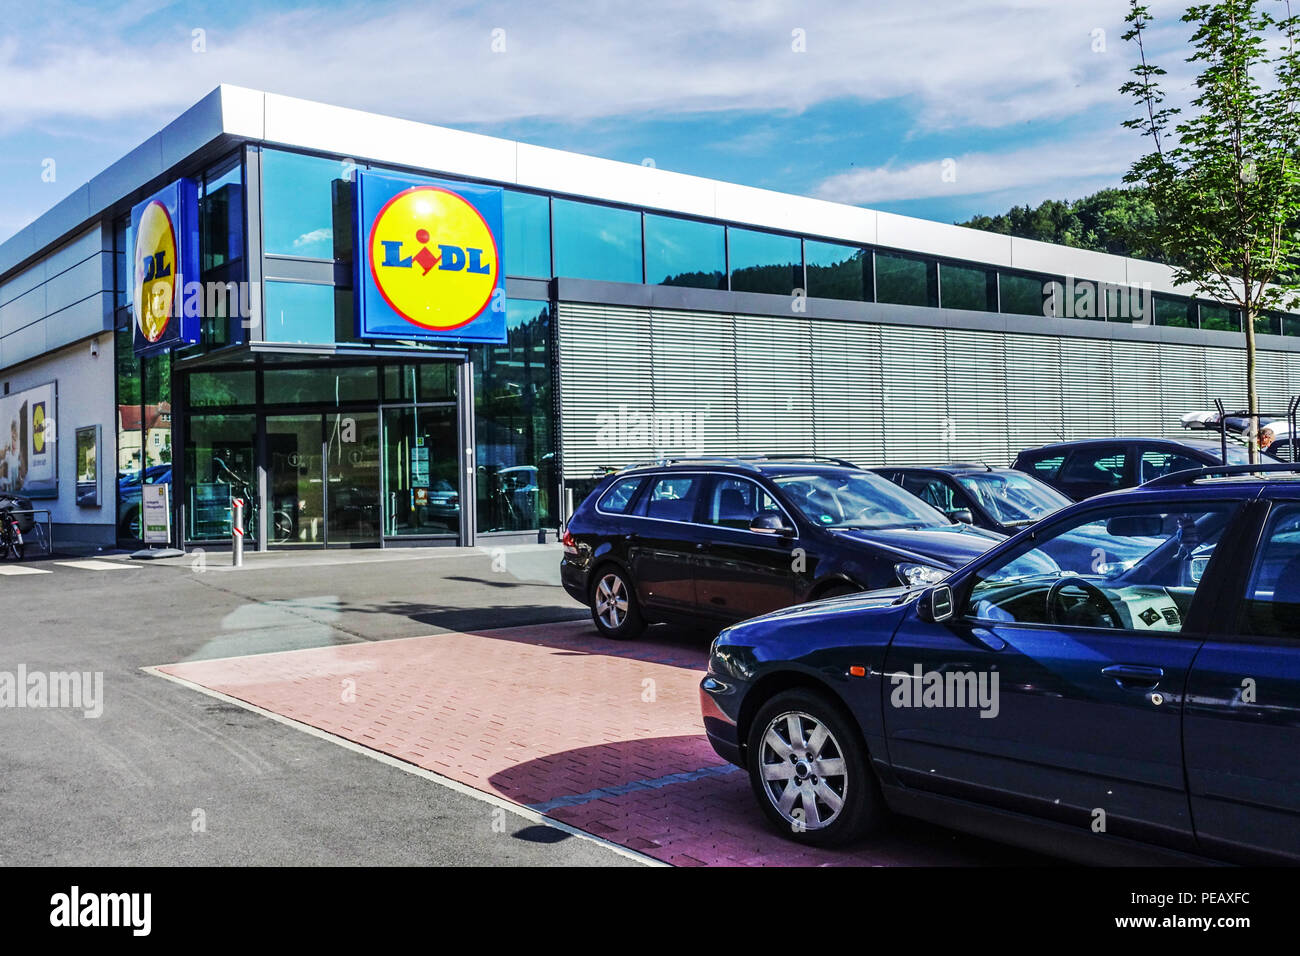 Lidl Supermarket Germany Parking place Cars Lidl car park, Lidl supermarket Lidl store Car park Lidl logo Store Shop, Outside Suburb Discount Company Stock Photo